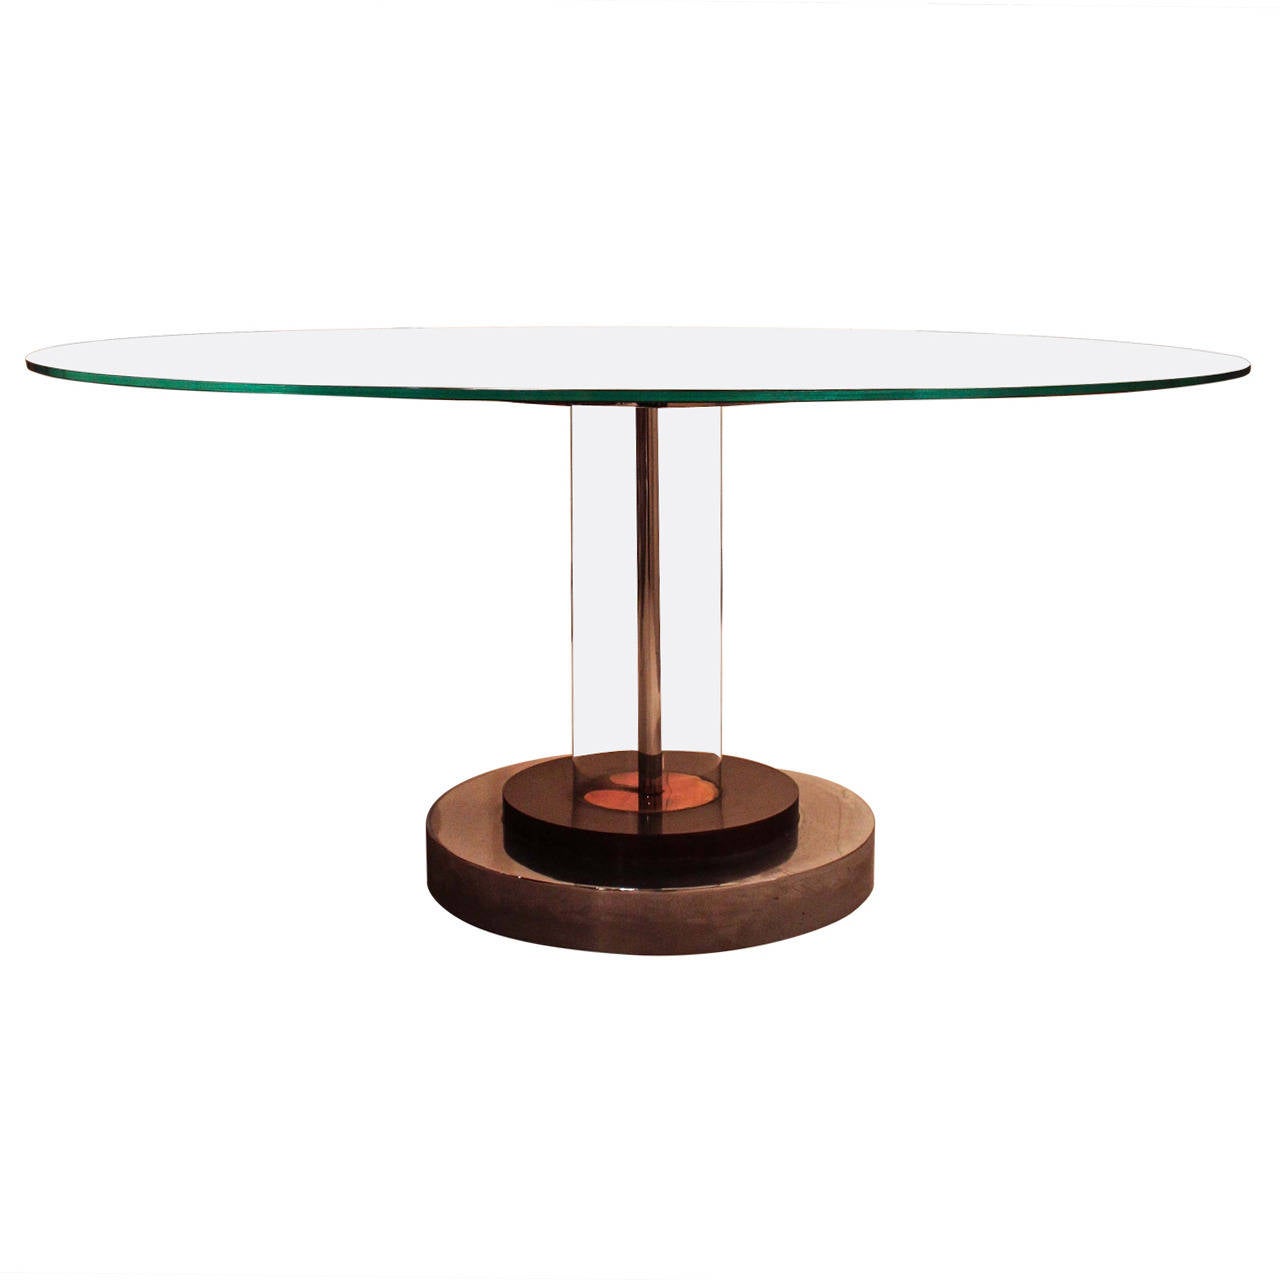 Beautiful 1970's Lucite, brass, and aluminum pedestal dining table. Original condition with thick black-glass top and clear outer ribbon detail, on layered tubular pedestal.